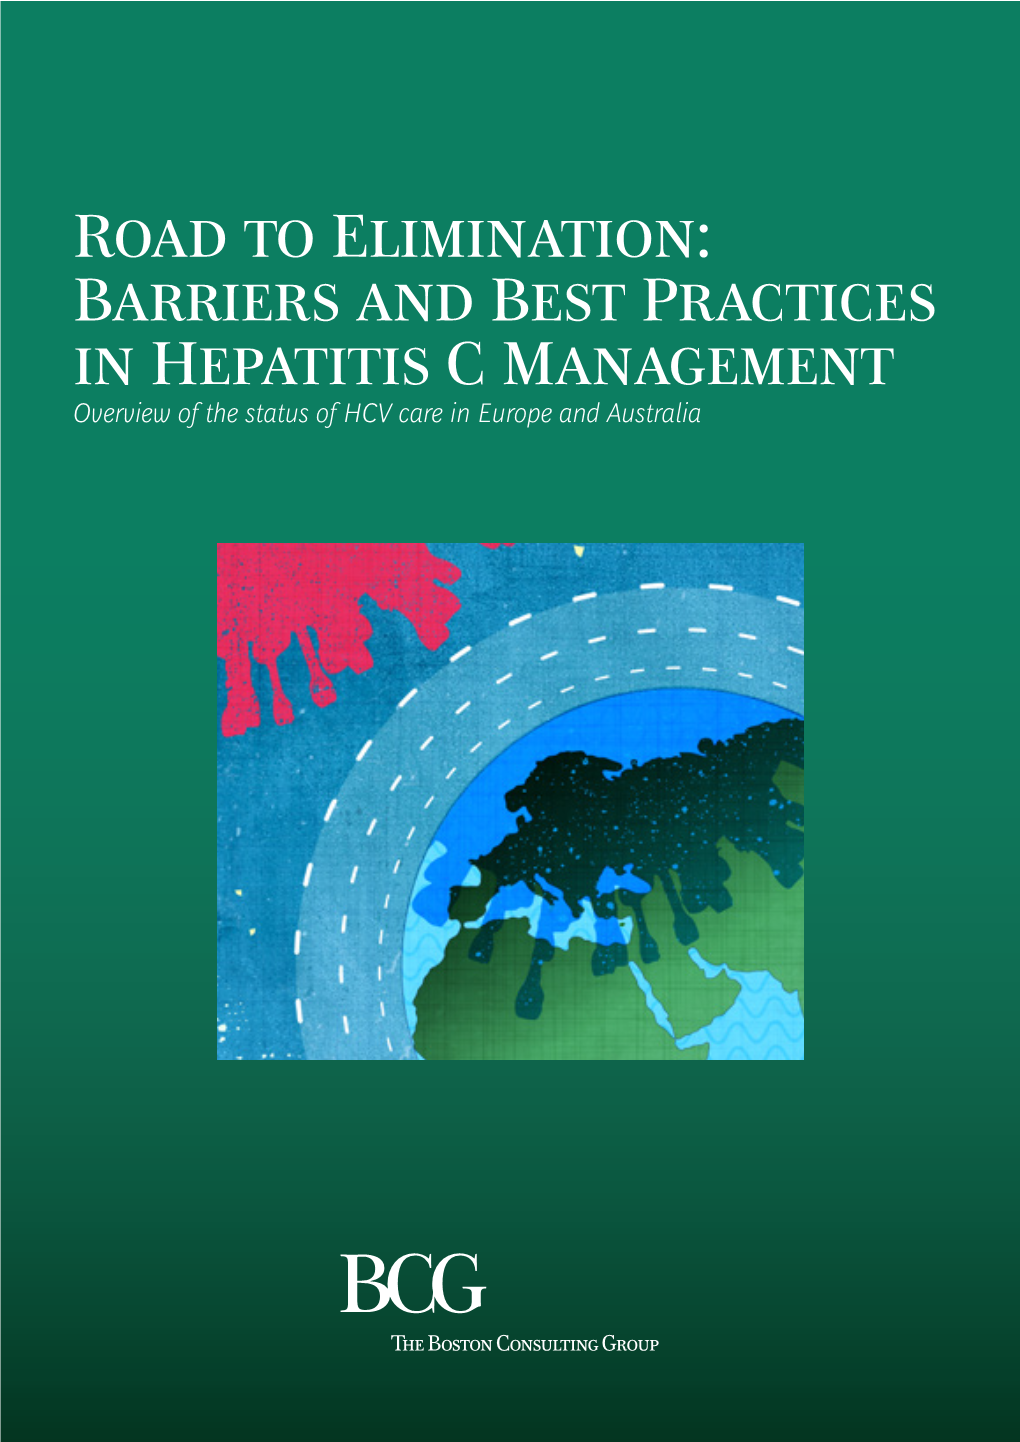 Road to Elimination: Barriers and Best Practices in Hepatitis C Management